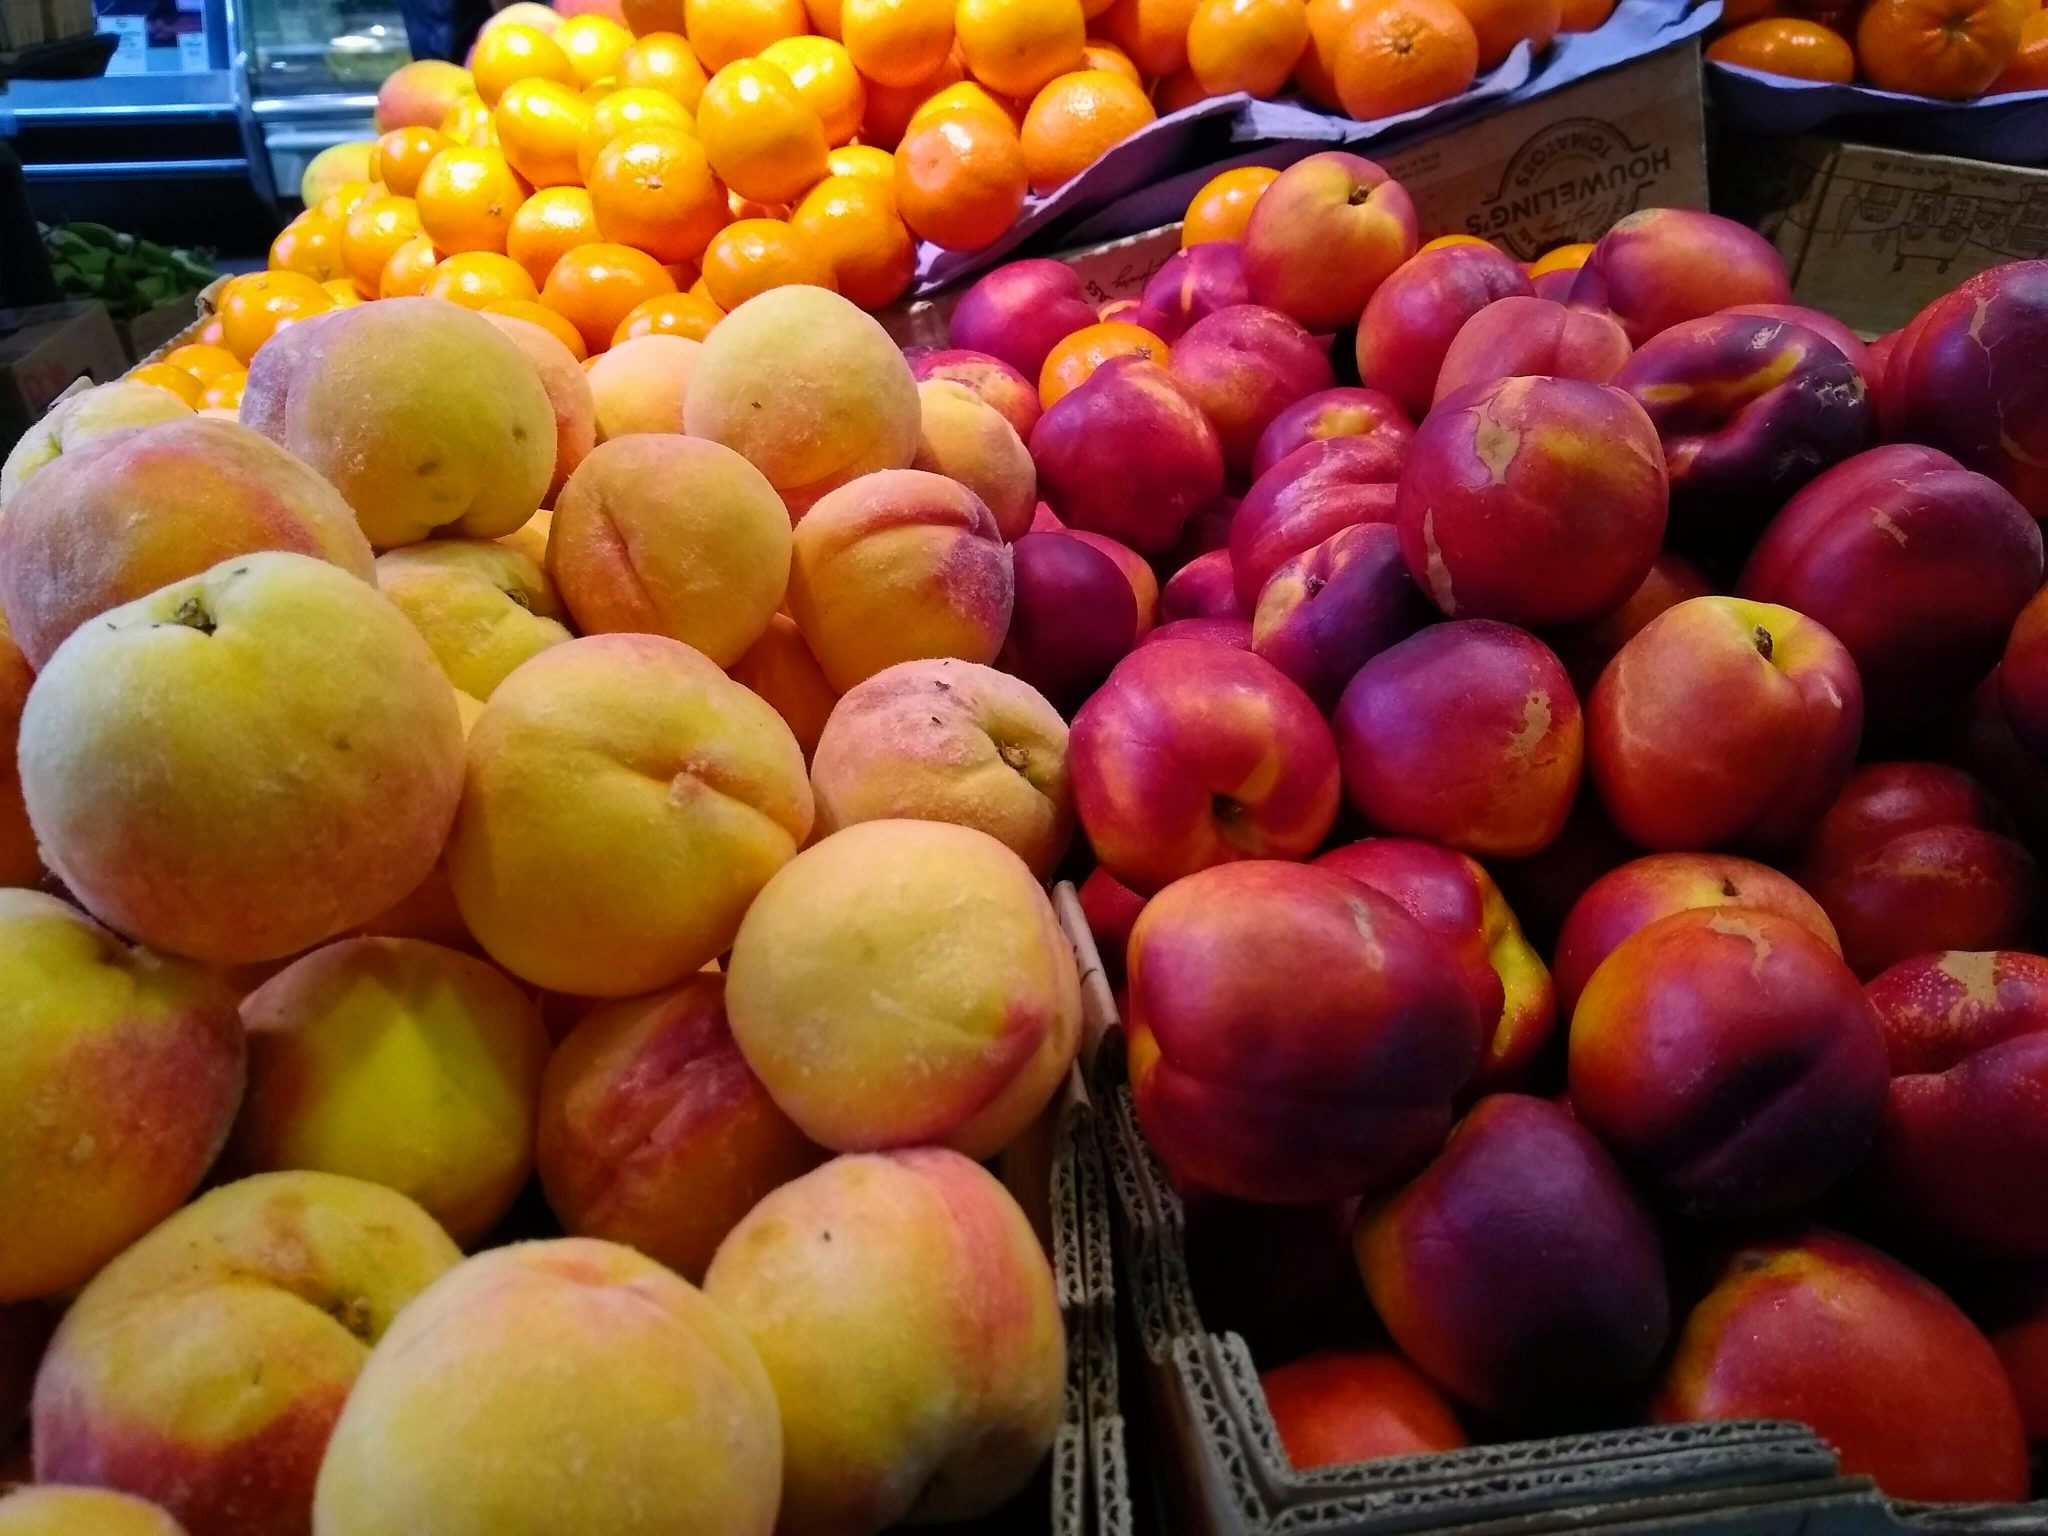 Yellow peaches are in a box to the left and red orange nectarines are in a box next to them at a market.